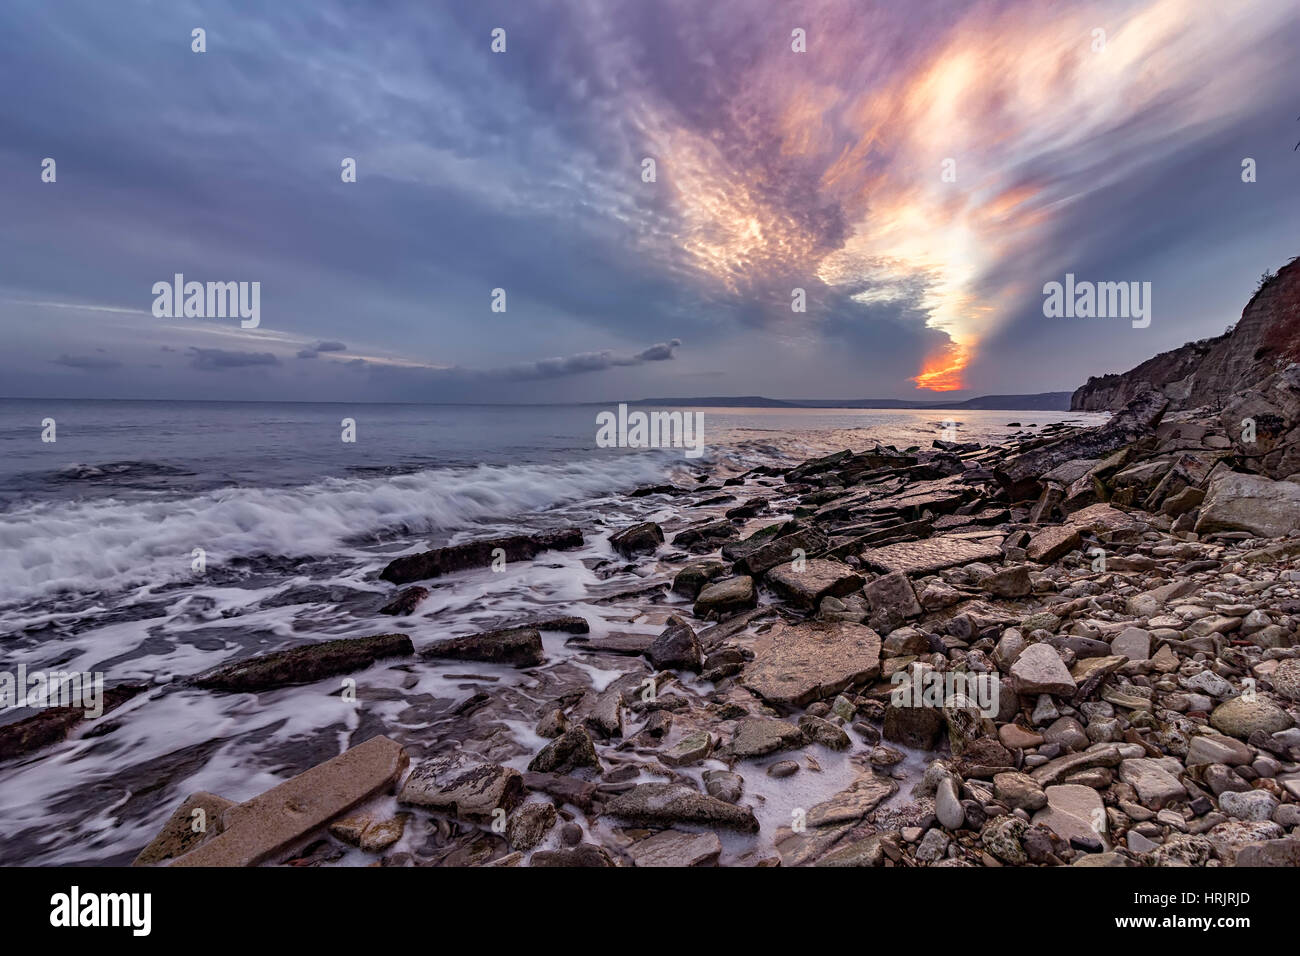 Exciting autumn sunset.Beauty sea rocky coast and cleavage sky Stock Photo